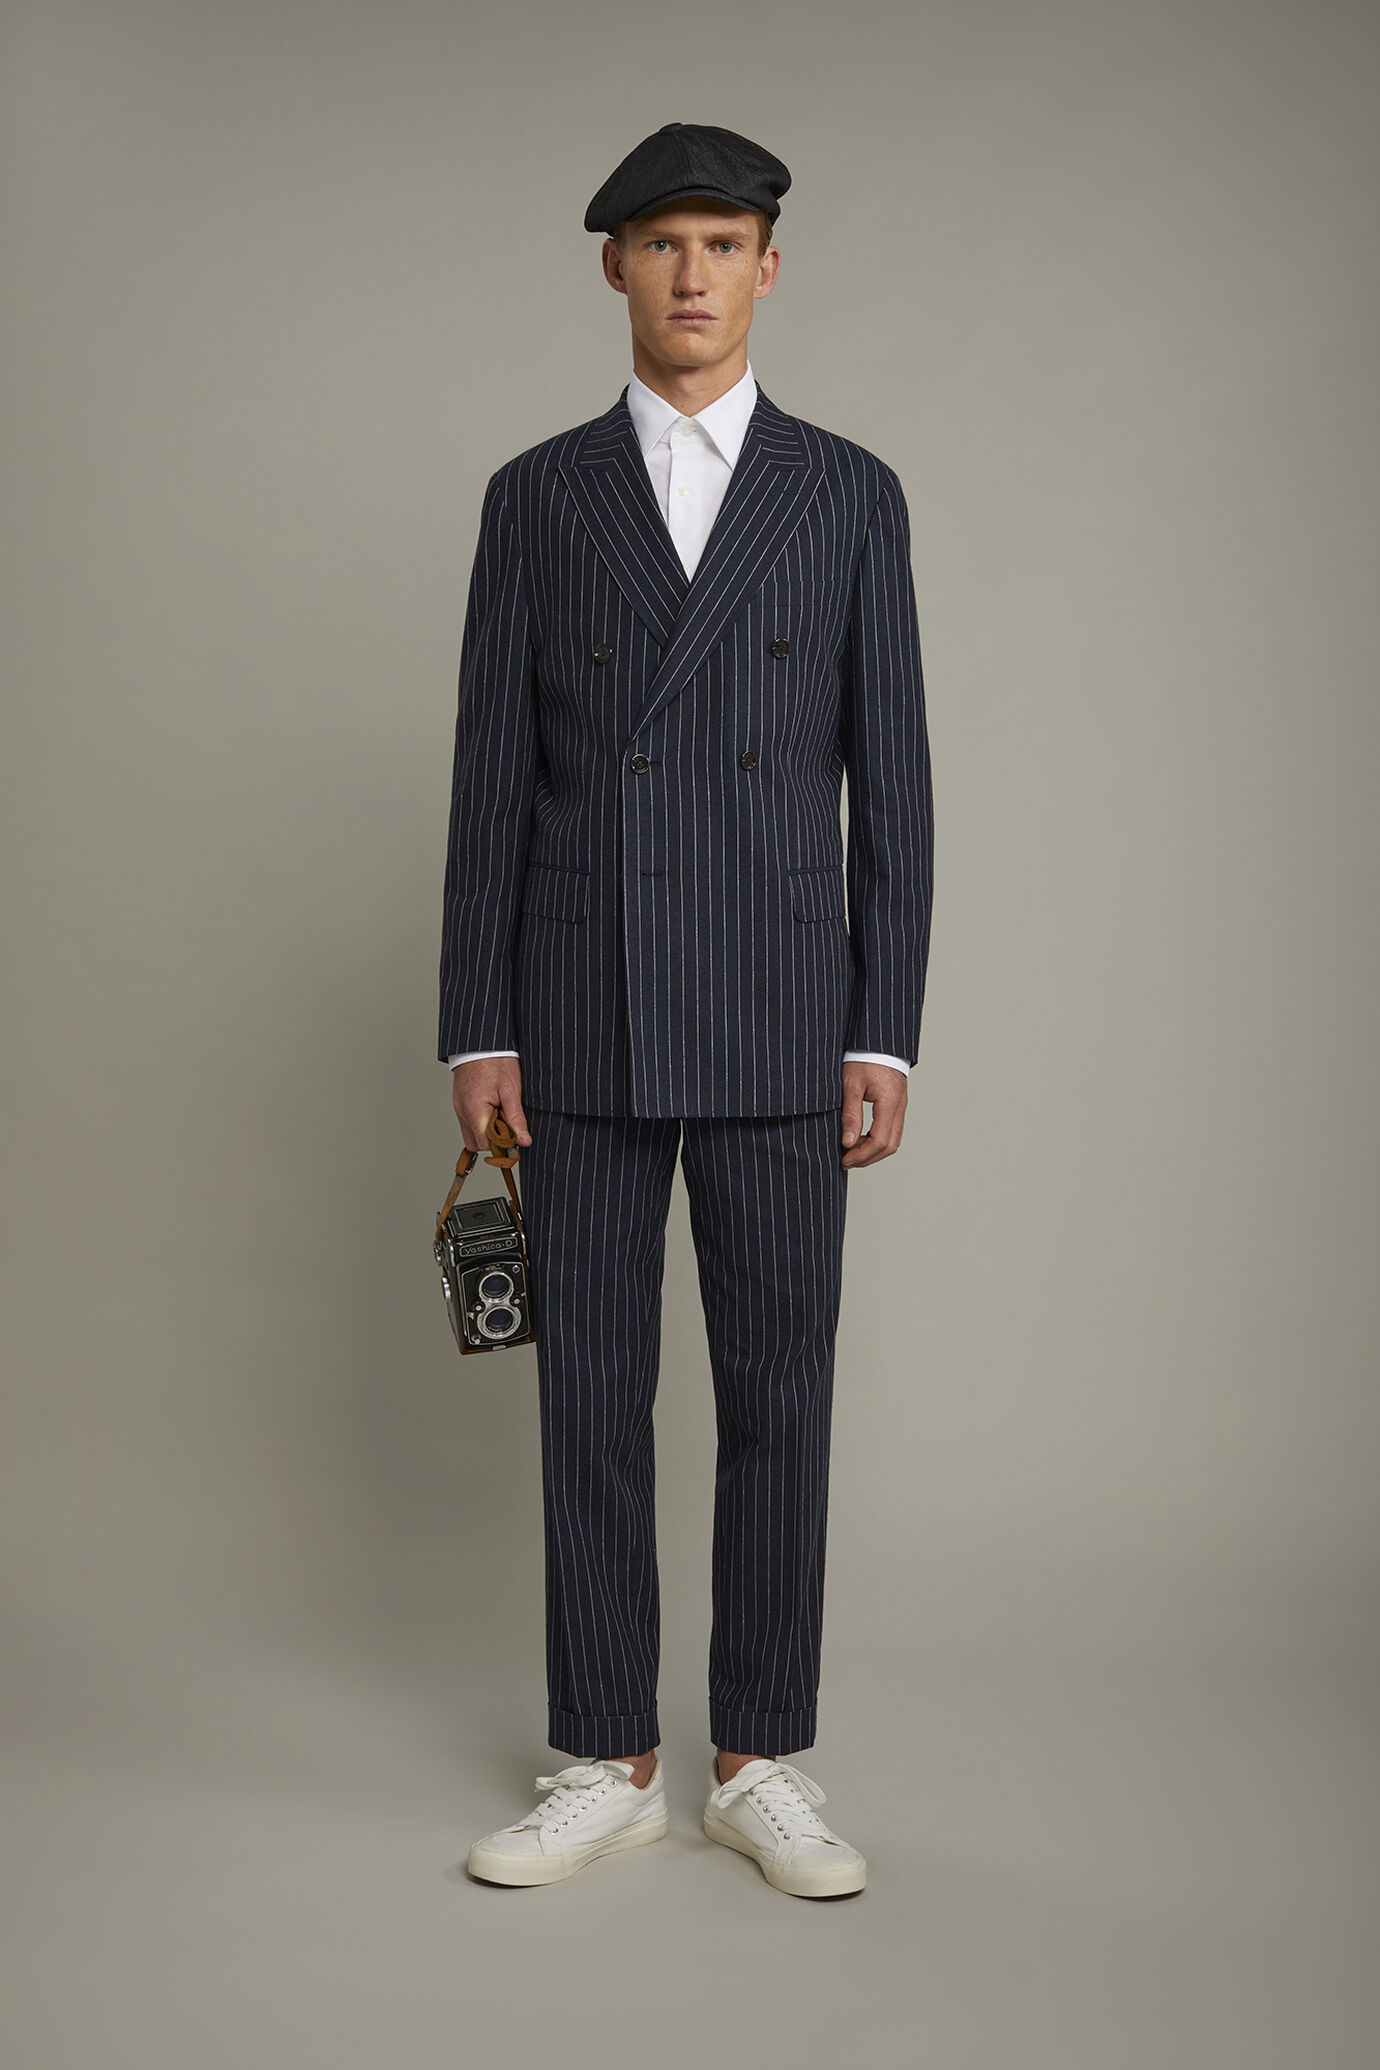 Men's classic double pinces trousers linen and cotton fabric with regular fit pinstripe design